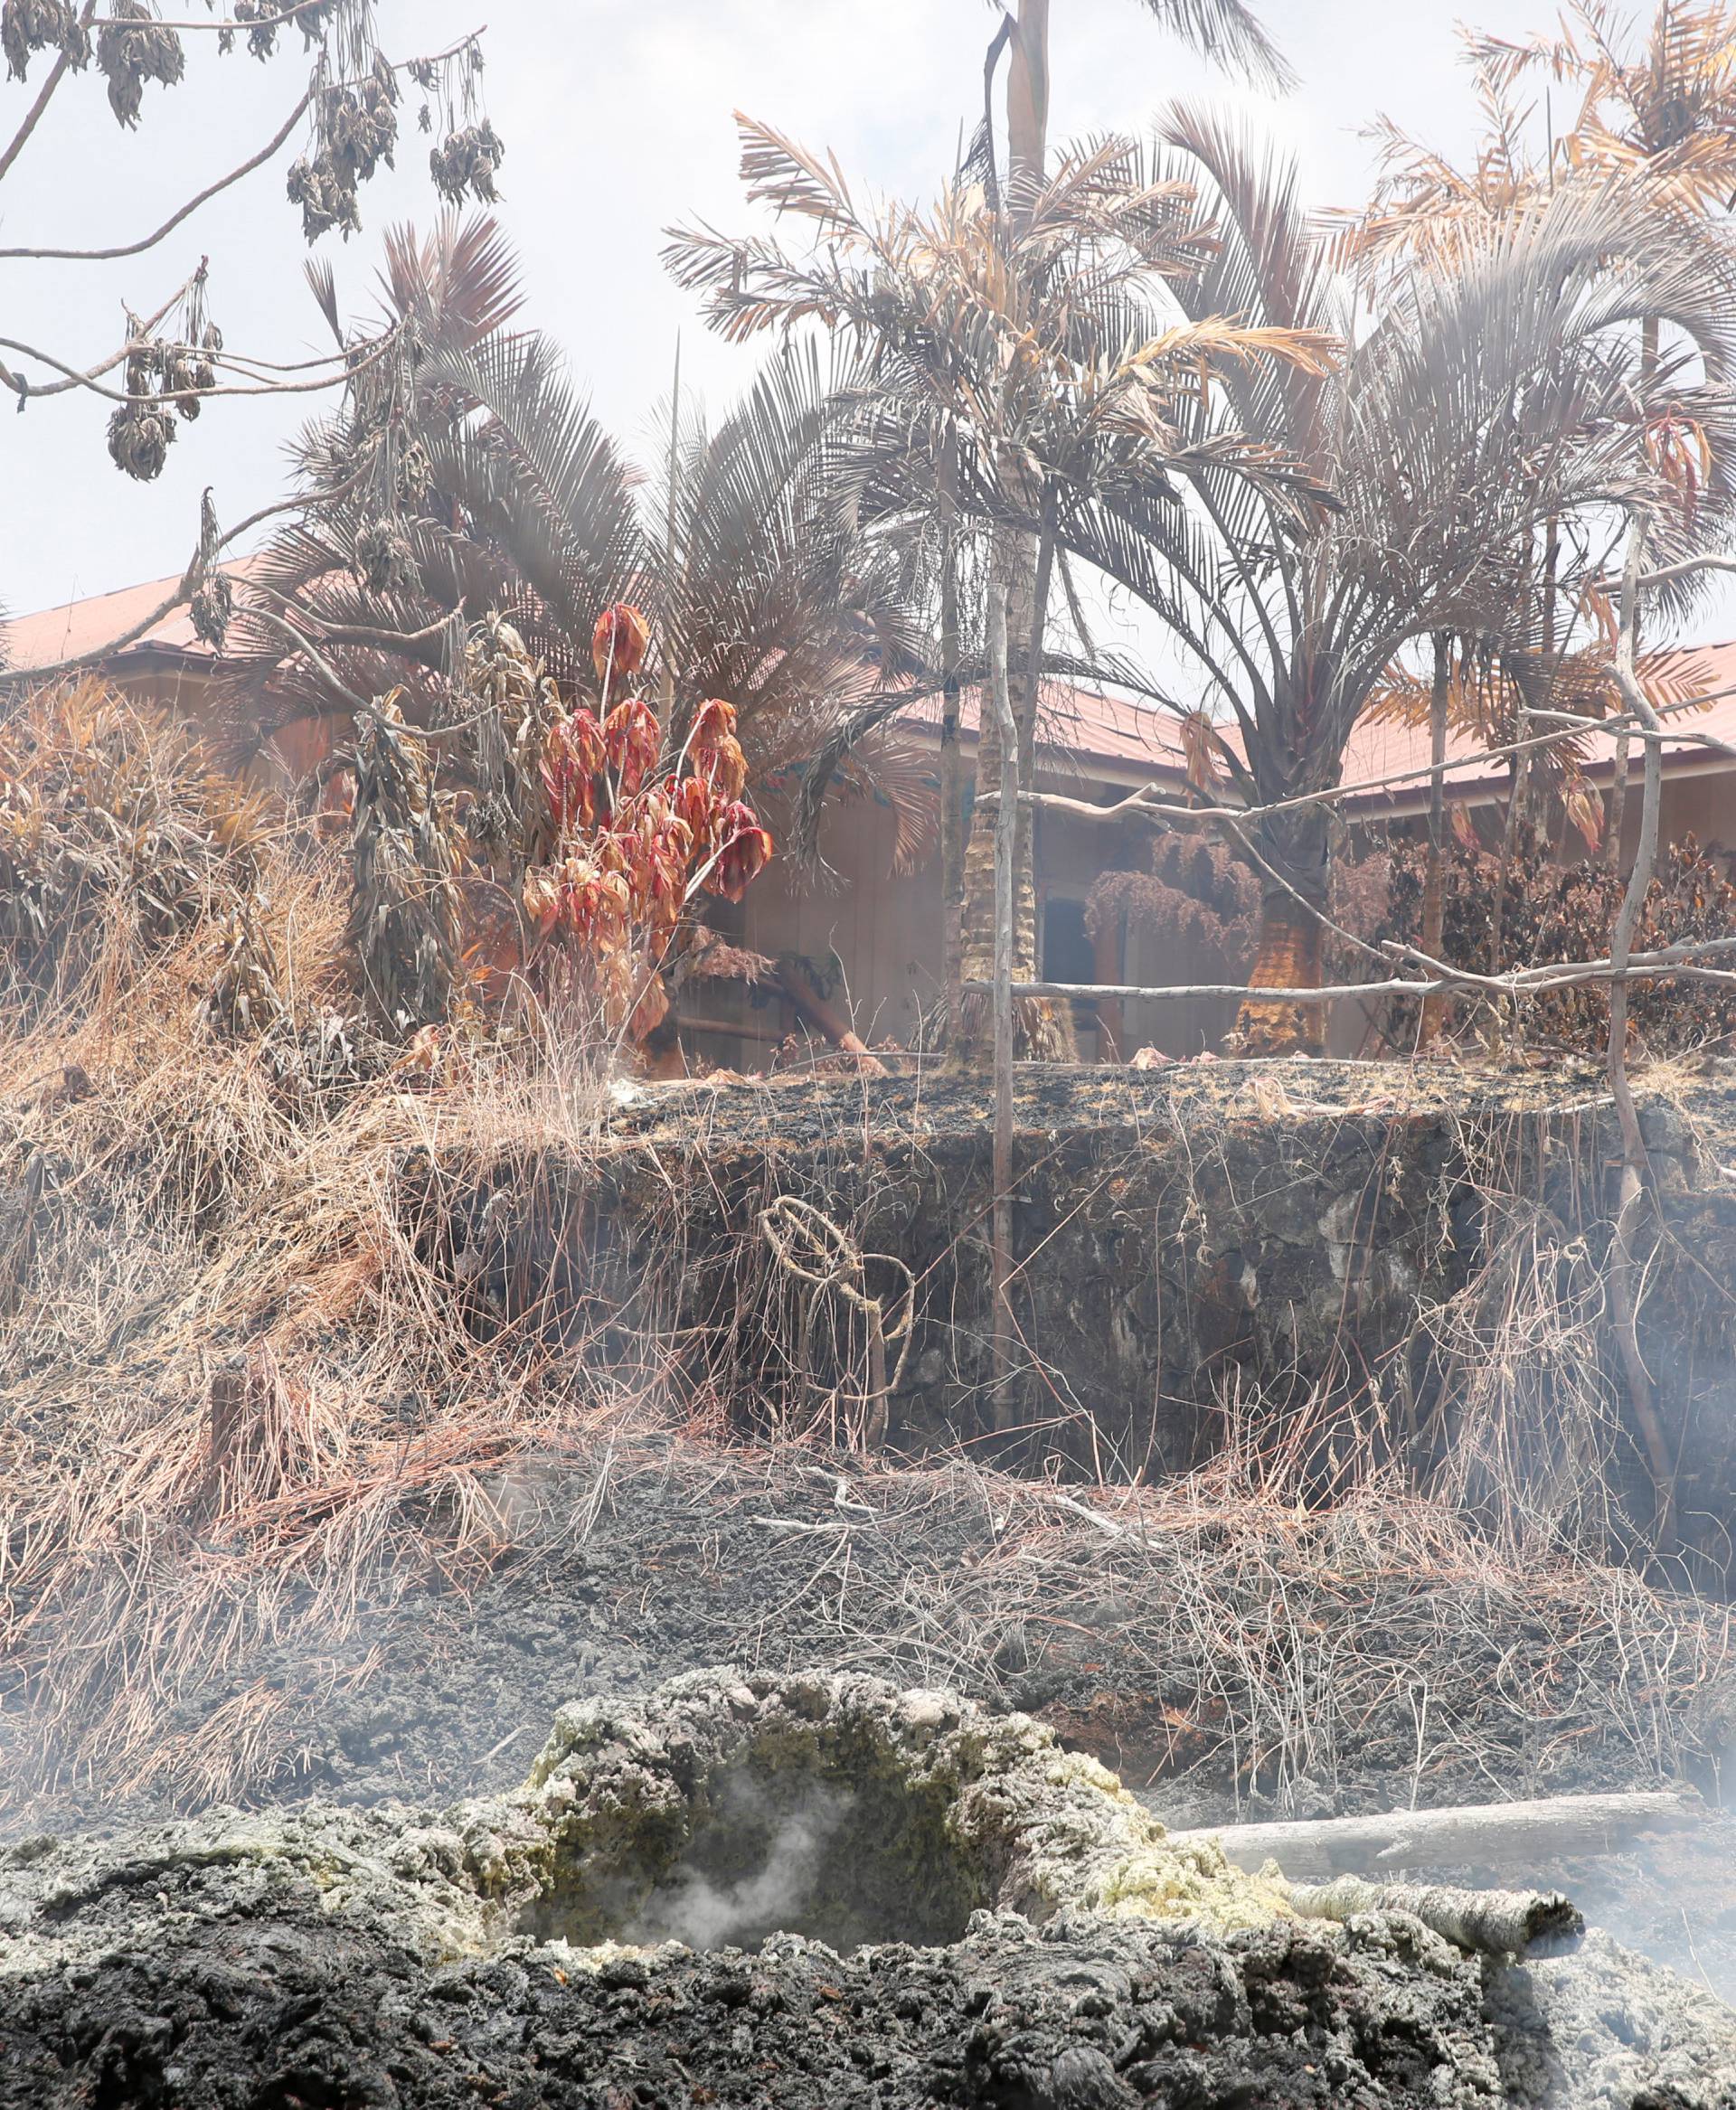 Volcanic gases rise from a fissure in the Leilani Estates subdivision